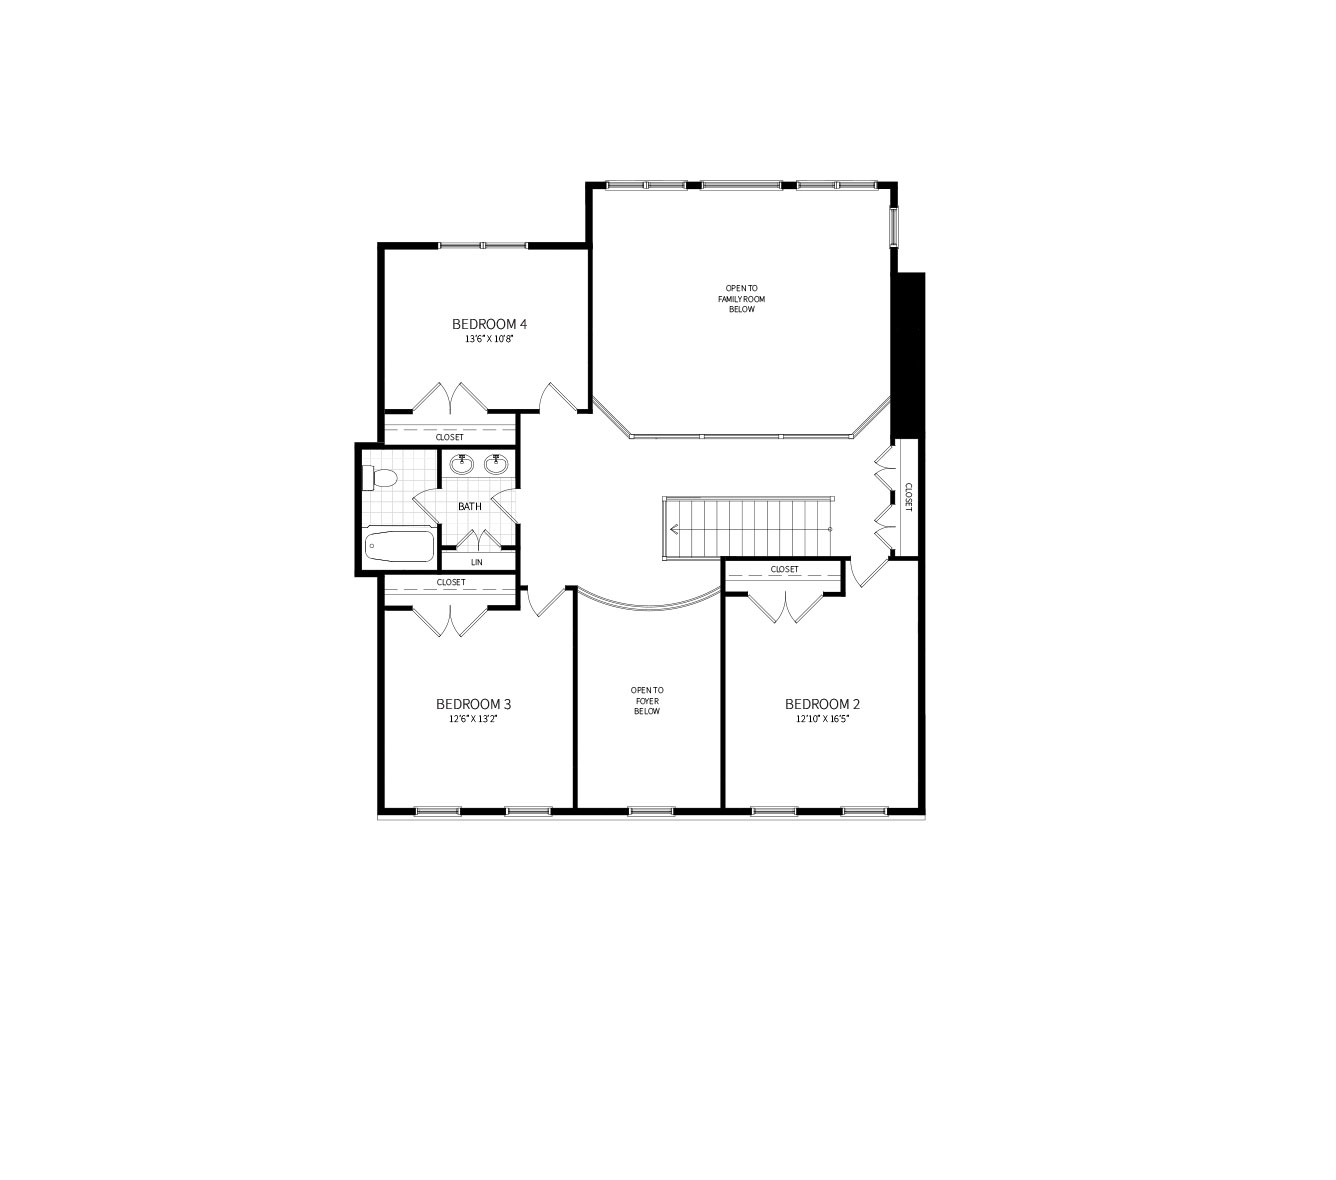 The McLean model second floor, featuring 3 additional bedrooms and a shared bath, hallway open to foyer/Family Room below.